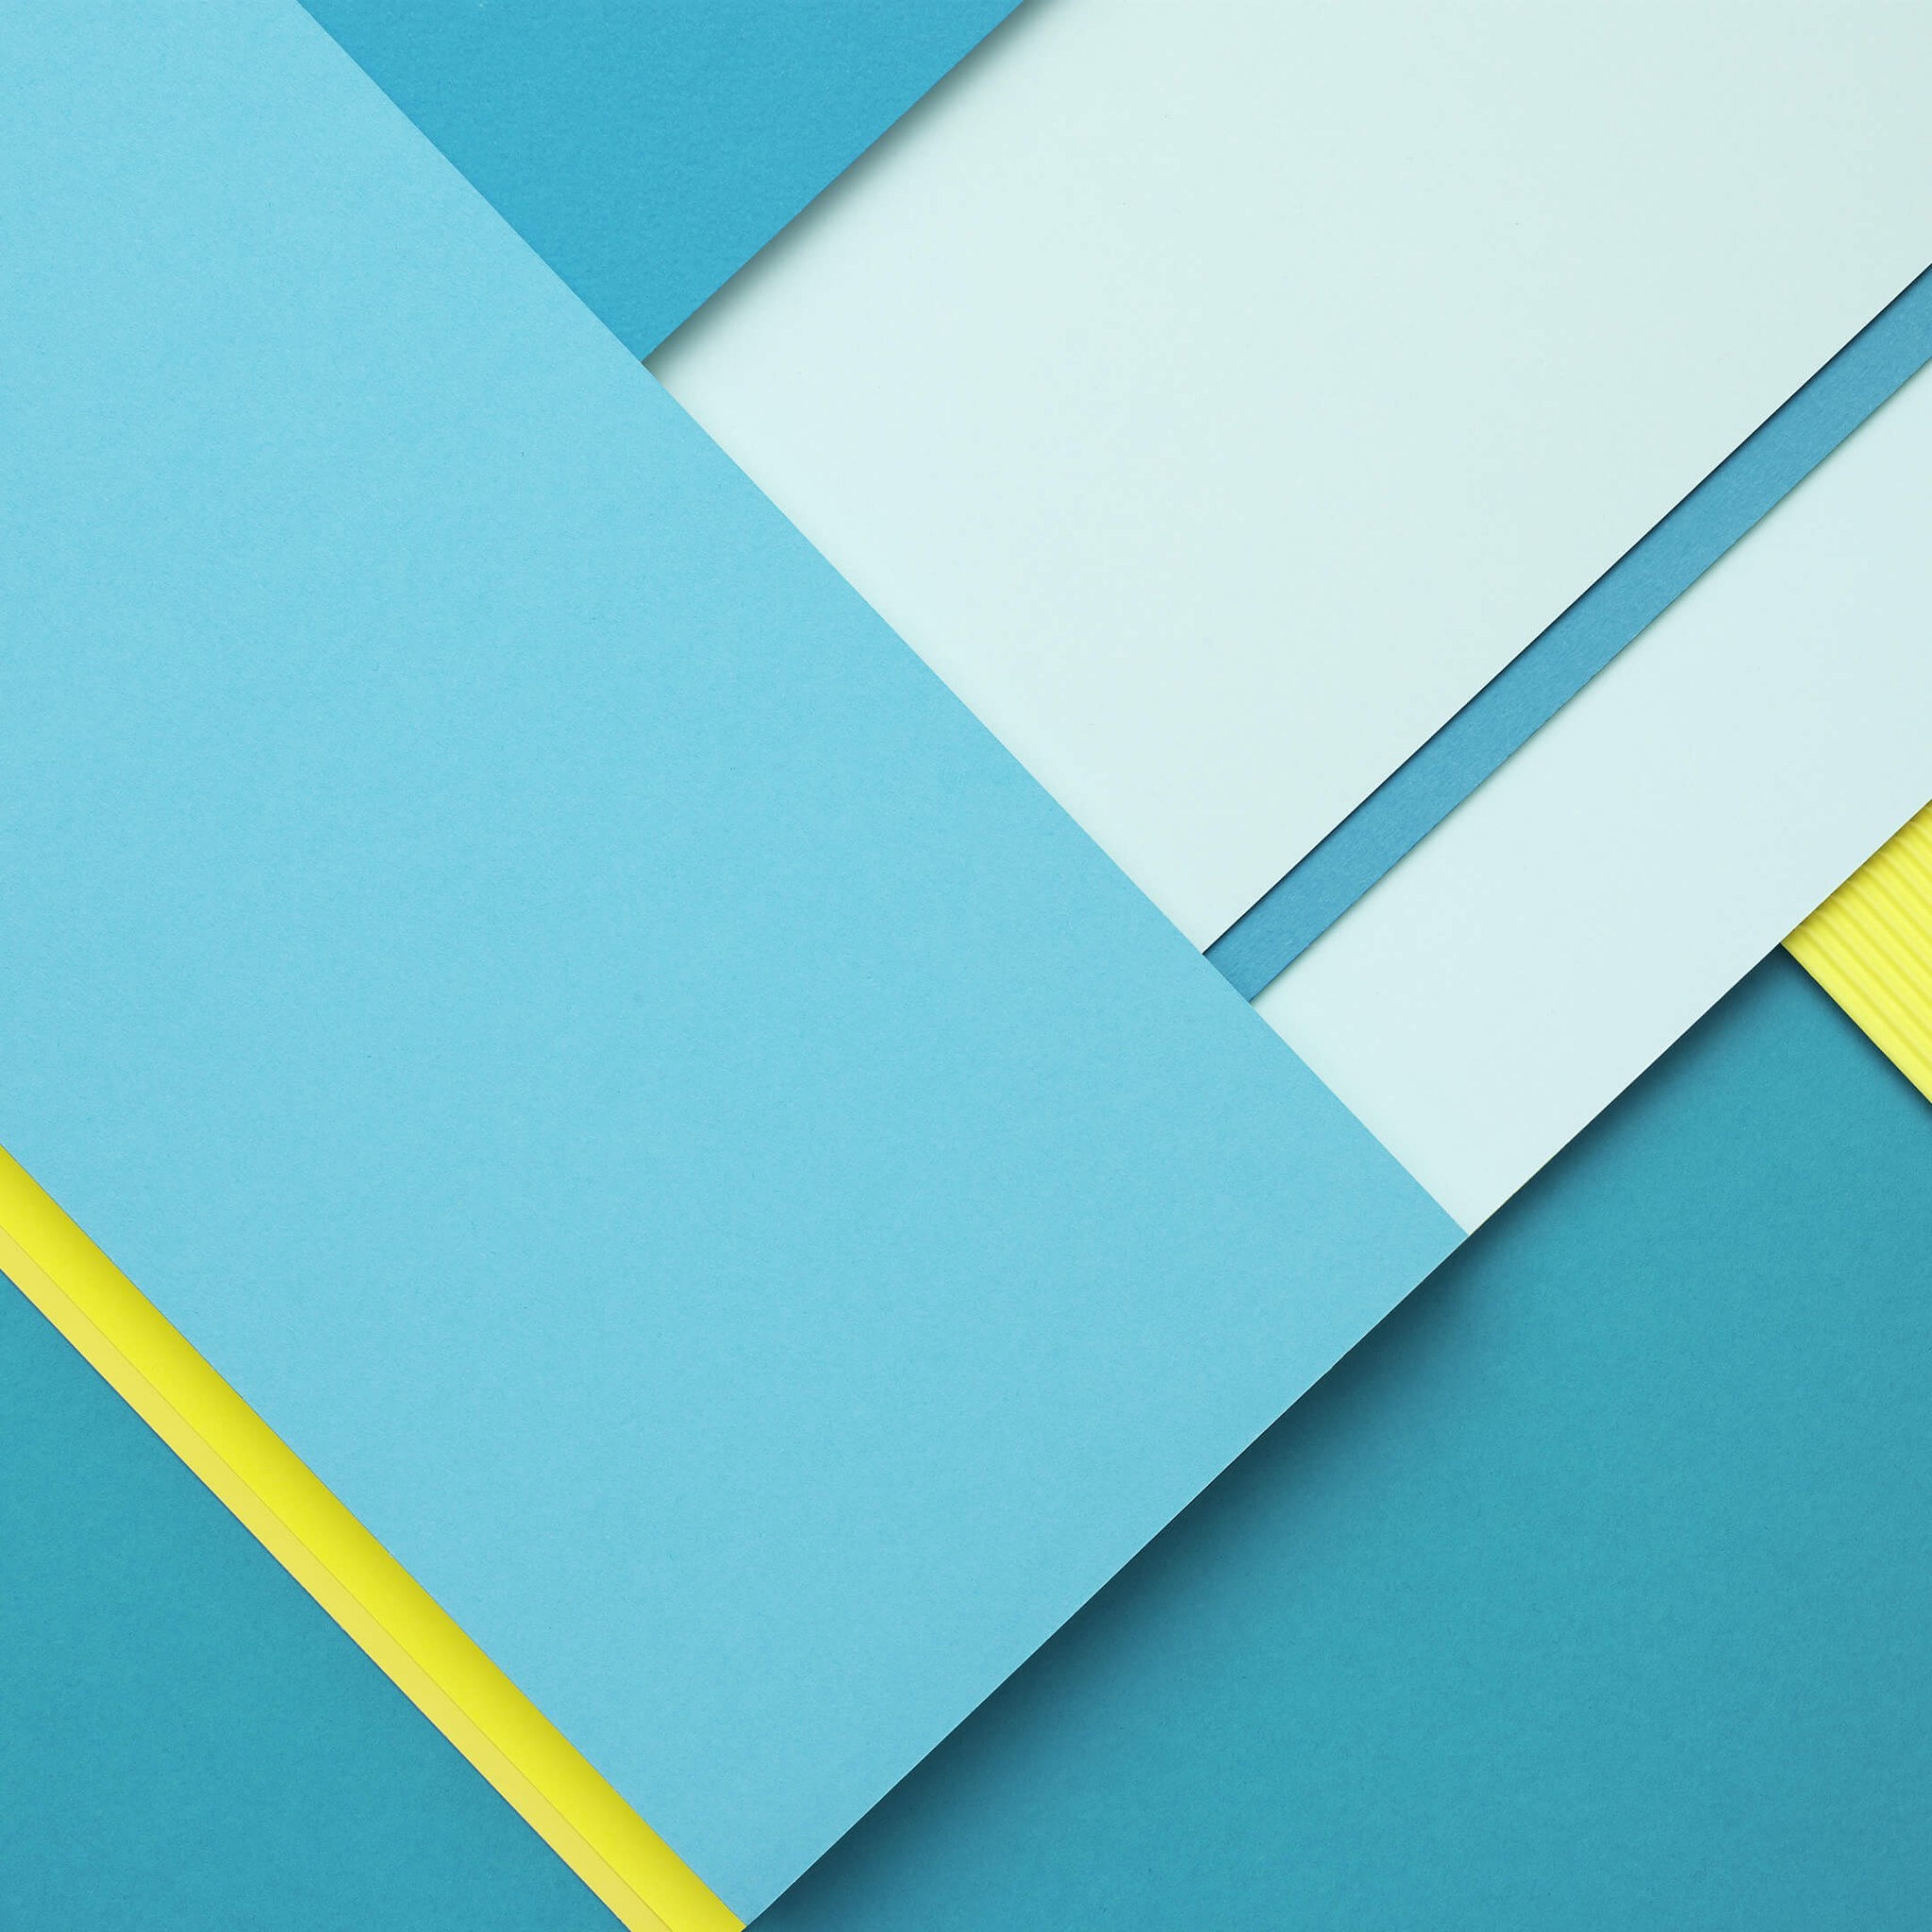 2048x2048 Download All the Android 6 Wallpapers for Nexus 6P / 5X